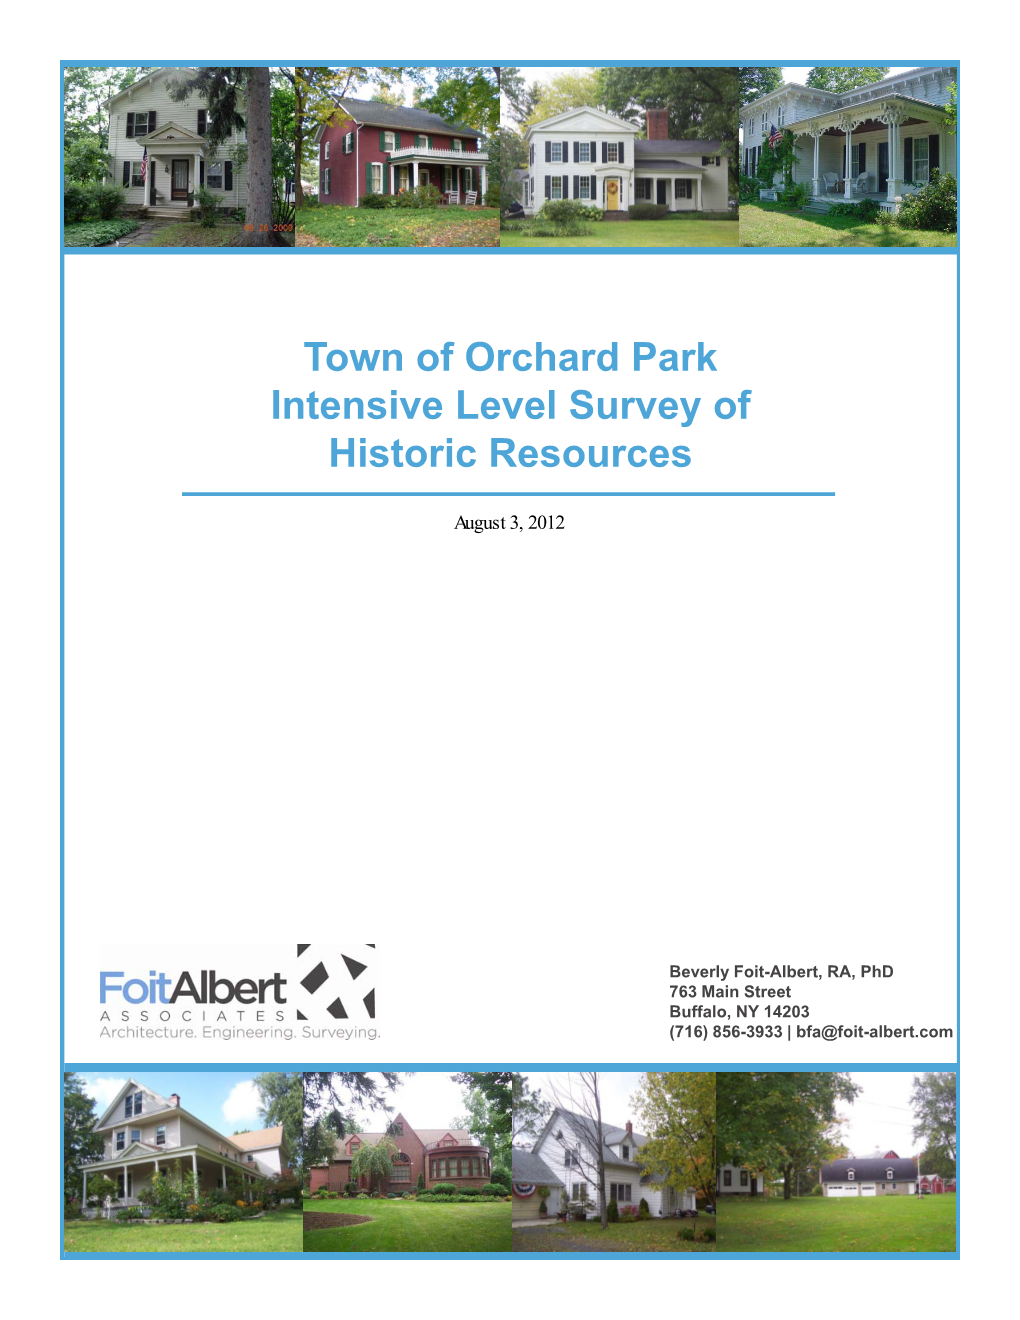 Town of Orchard Park Intensive Level Survey of Historic Resources